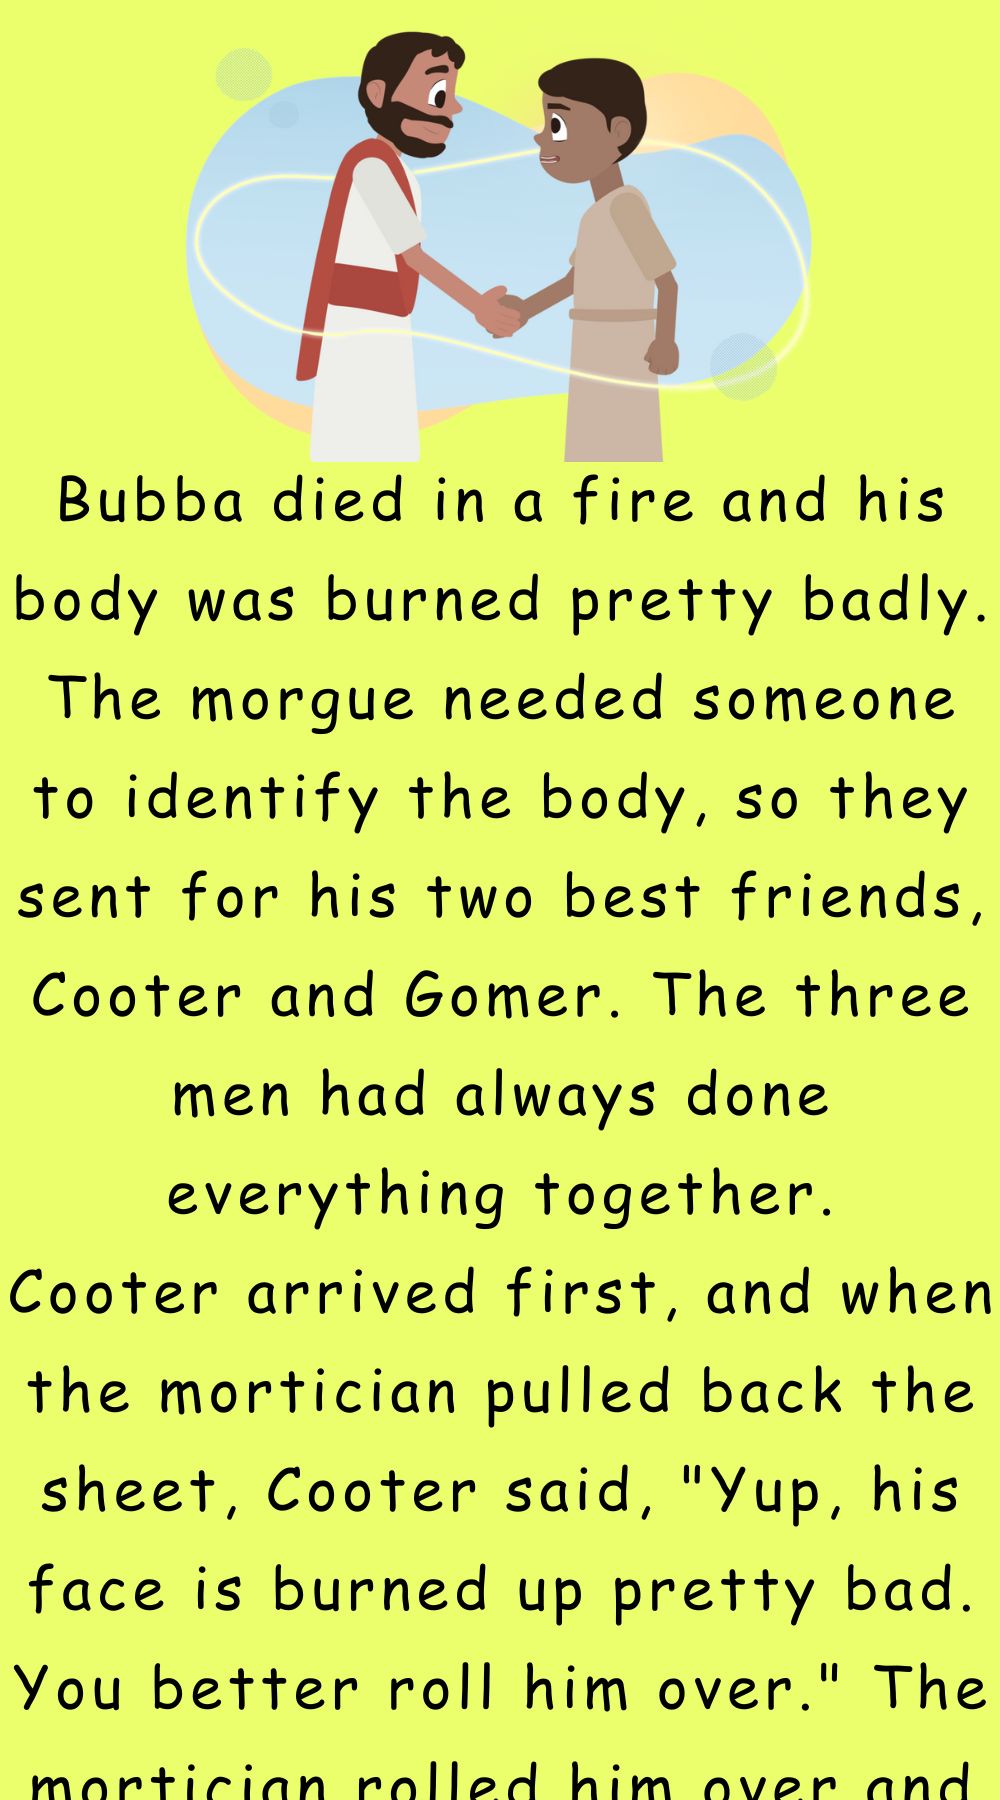 Bubba died in a fire and his body